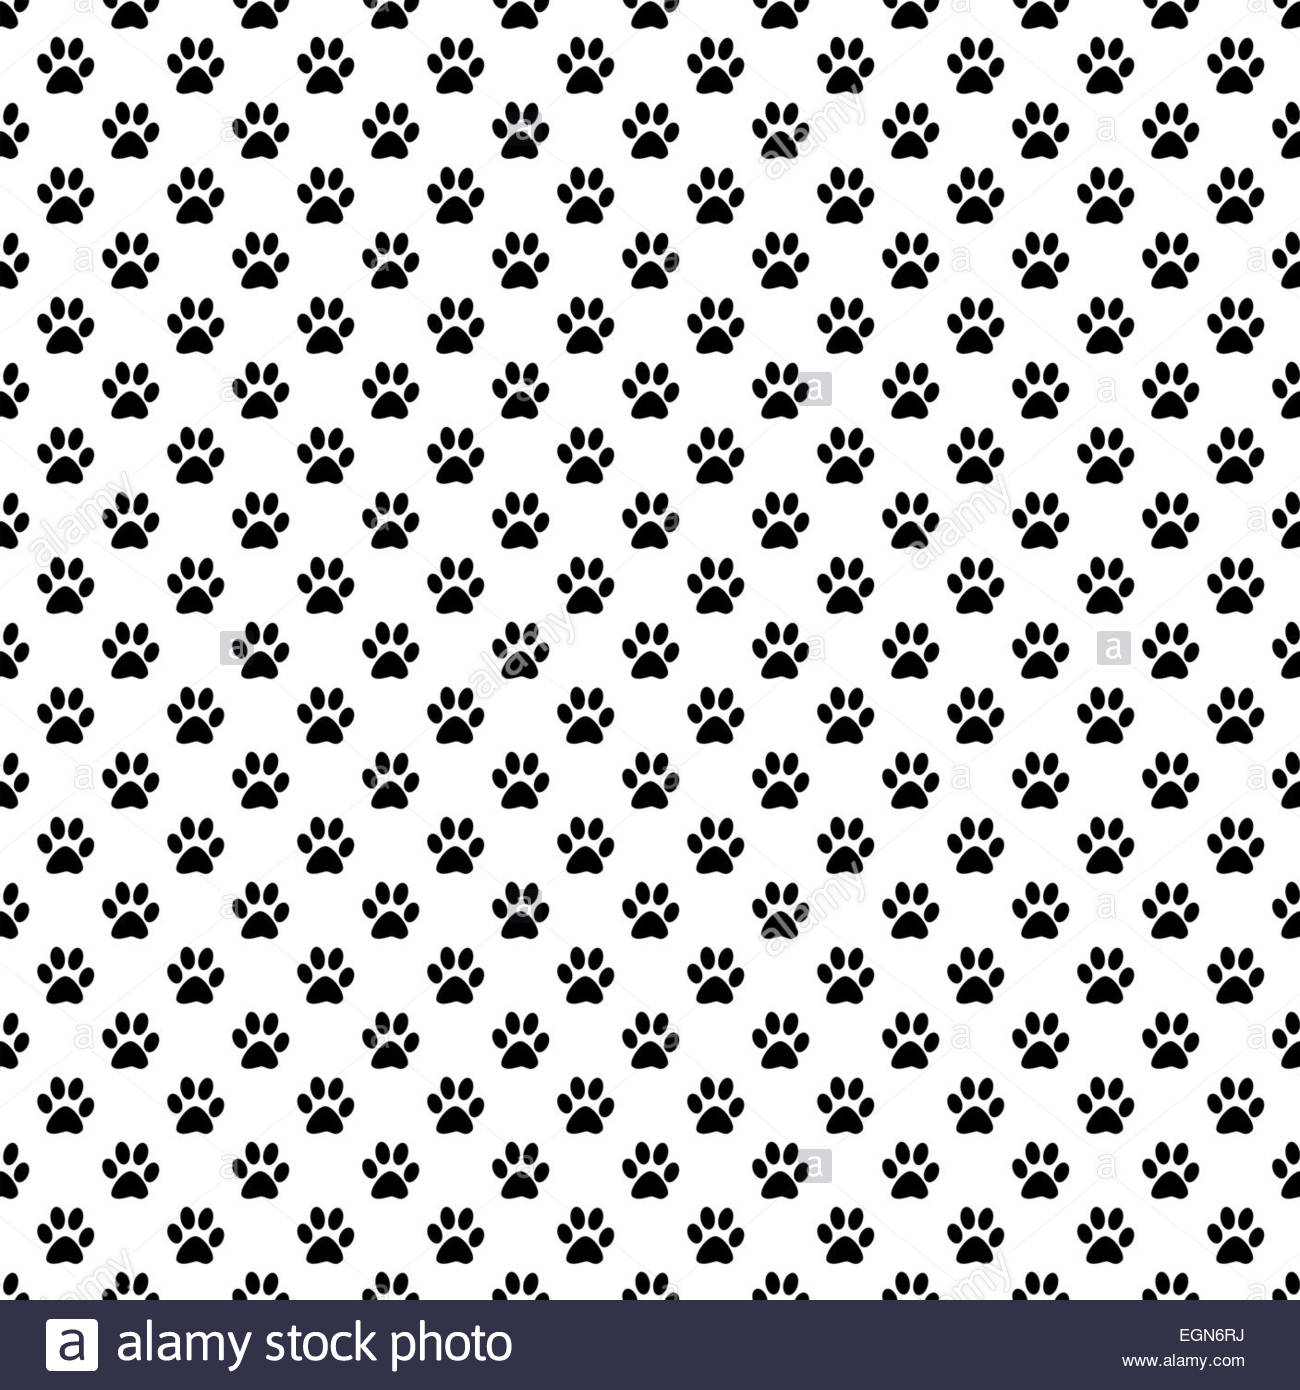 Dog Paws Black And White Polka Dot Texture Background Pattern